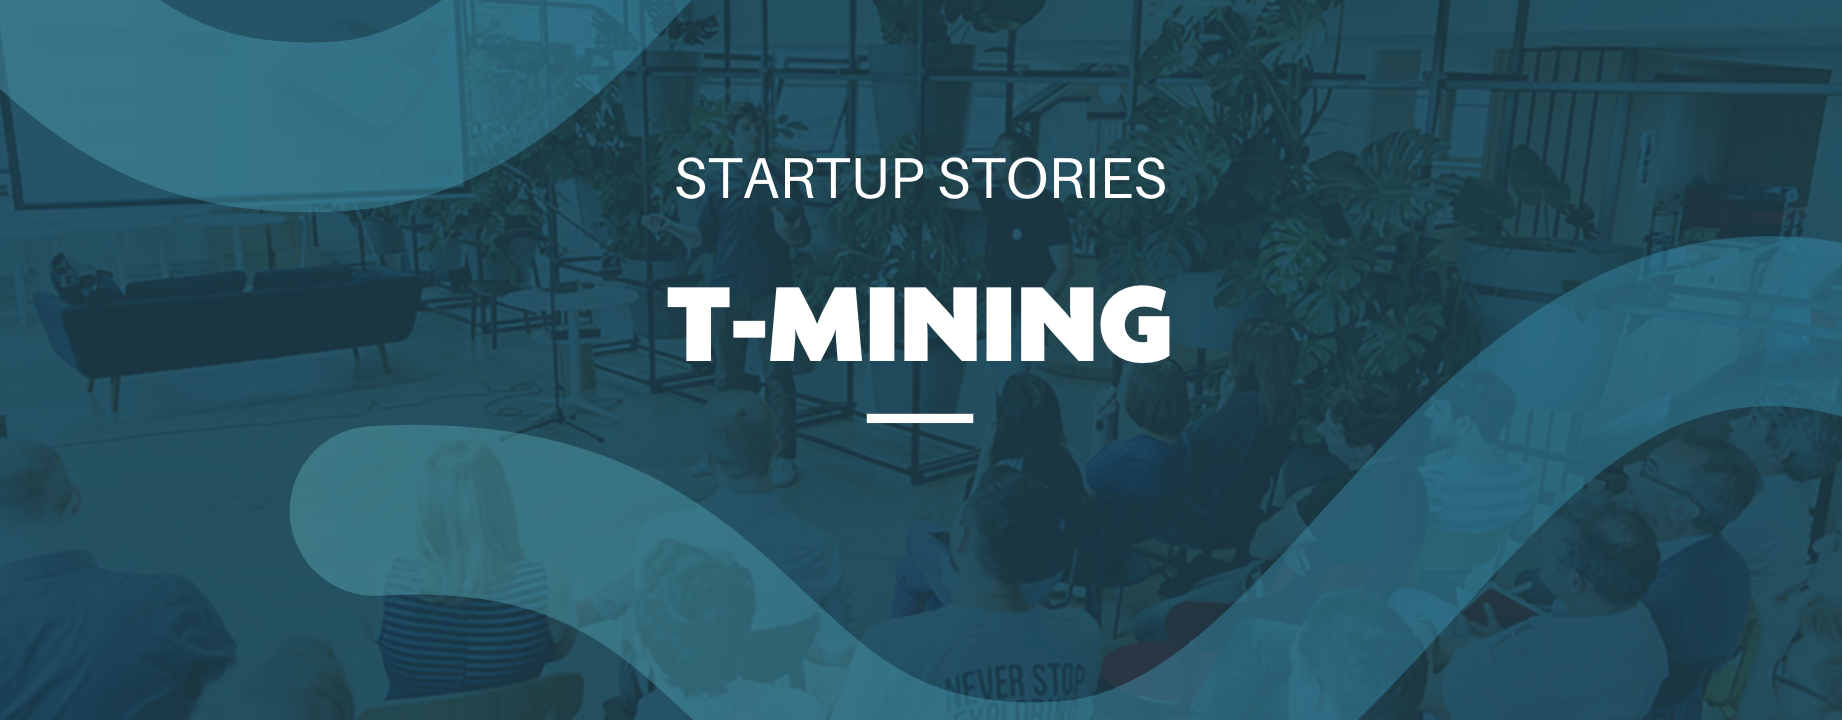 tmining startup story